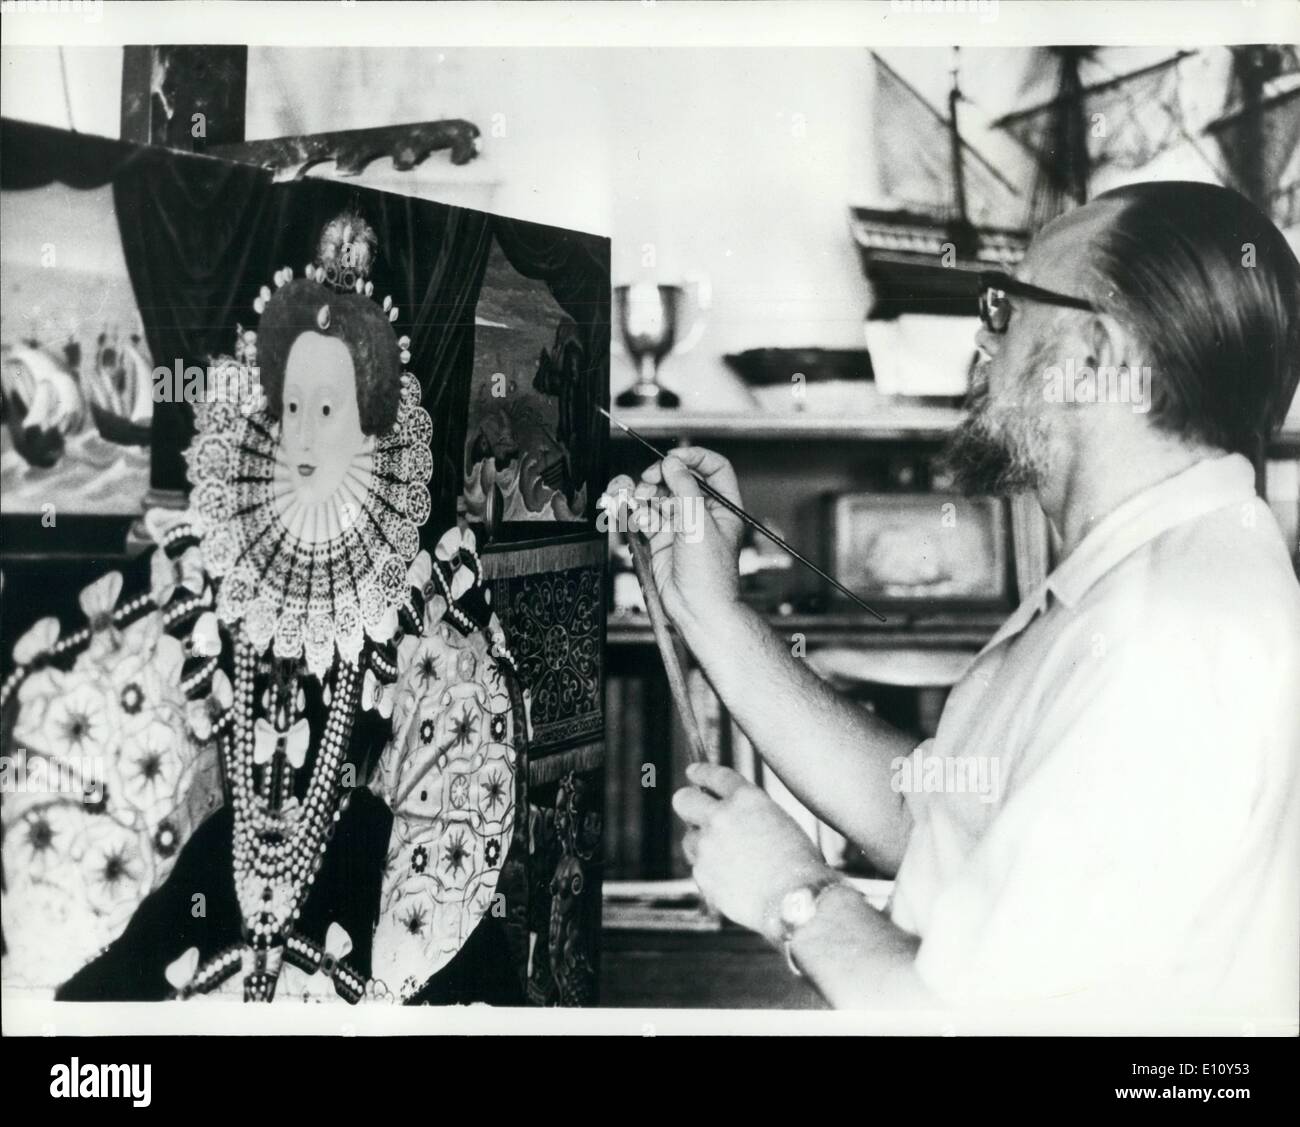 Aug. 08, 1974 - London Artist Paints For ''Golden Hinde'': An usual commission for artist Peter Wood, of Barnes, London, in this painstaking copy of a 16th century portrait of Queen Elizabeth I. executed as one of a series for the Great Cabin in the full-size replica of Drake's Golden Hinde. The replica, currently open to the public near the Tower of London, will also carry two portraits of King Philip of Spain and Drake himself, executed by the same artist, on her 6-month voyage to San Francisco, due to begin this autumn. Stock Photo